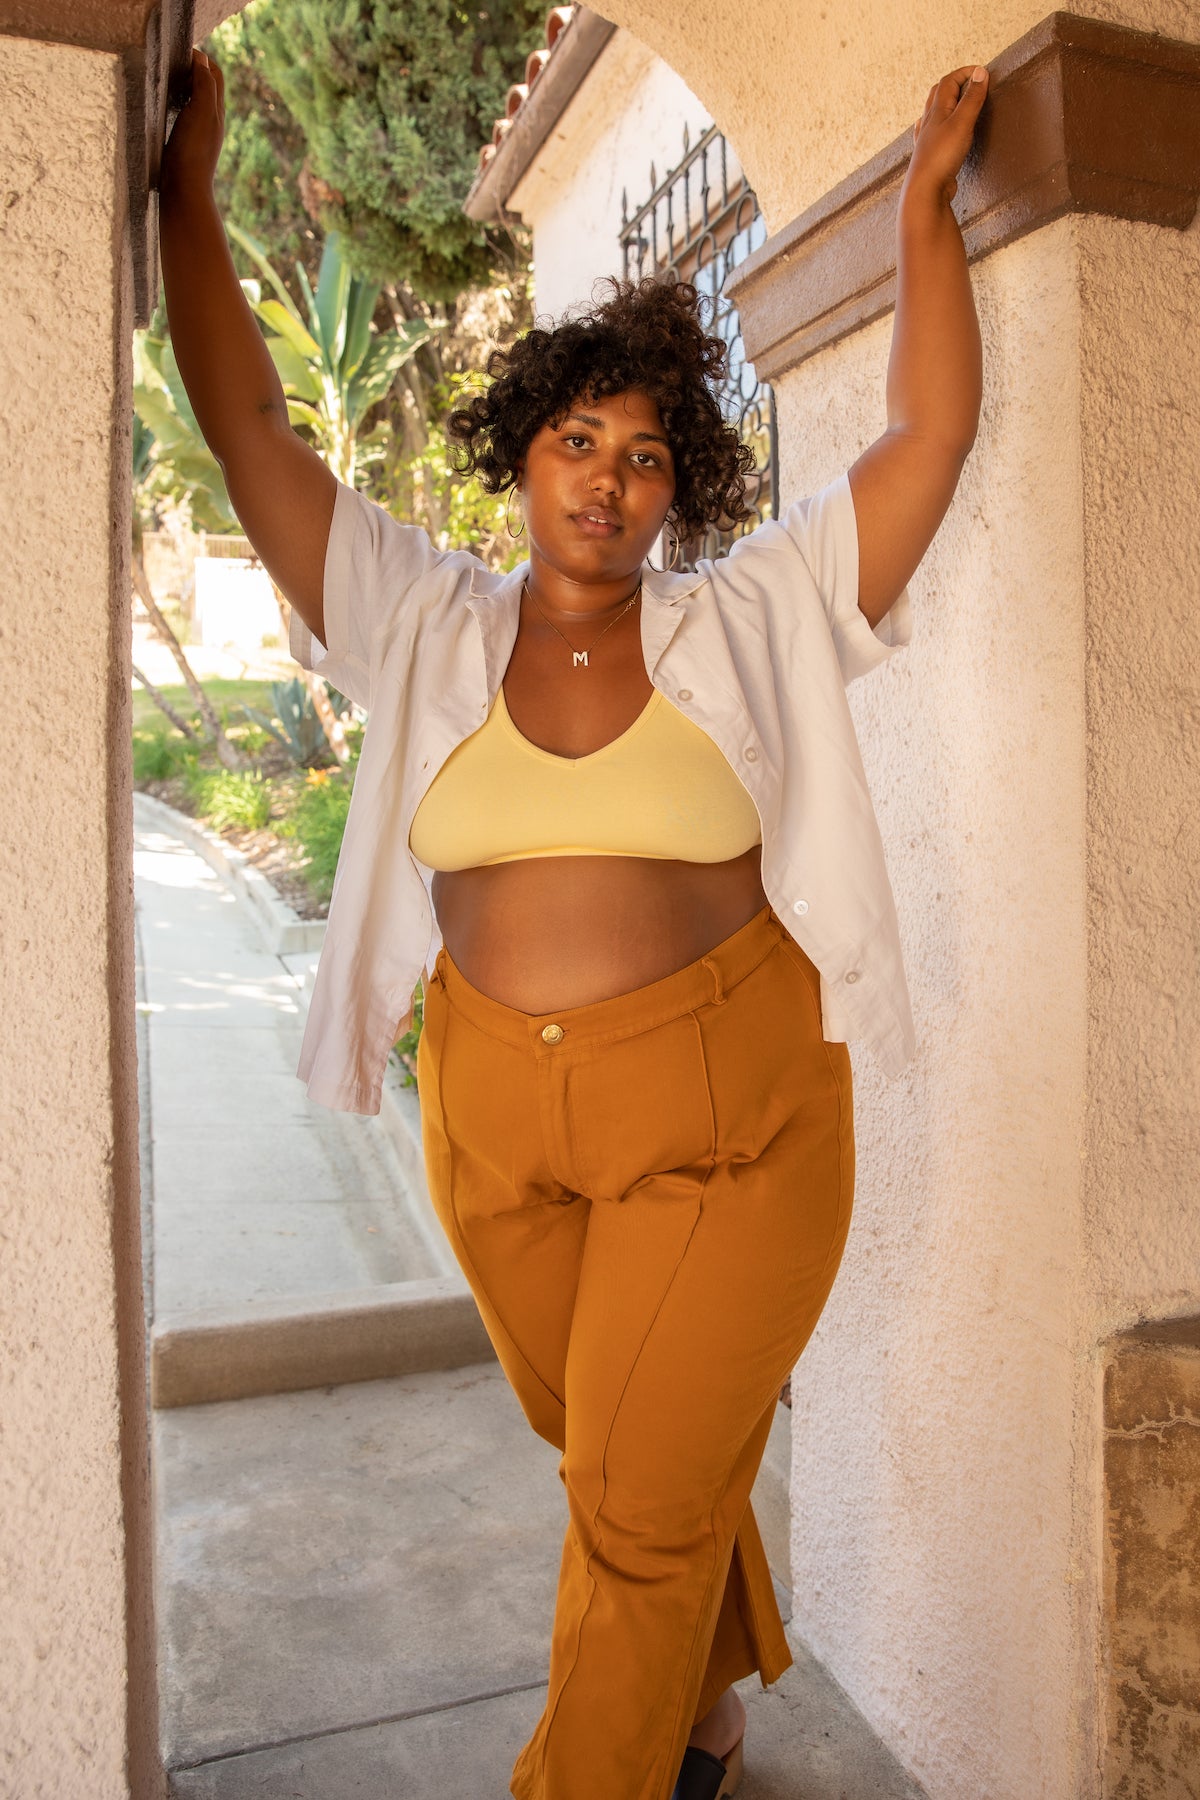 Morgan is wearing Pantry Button-Up in Vintage Off-White, Bralette in Butter Yellow, and Western Pants in Spicy Mustard